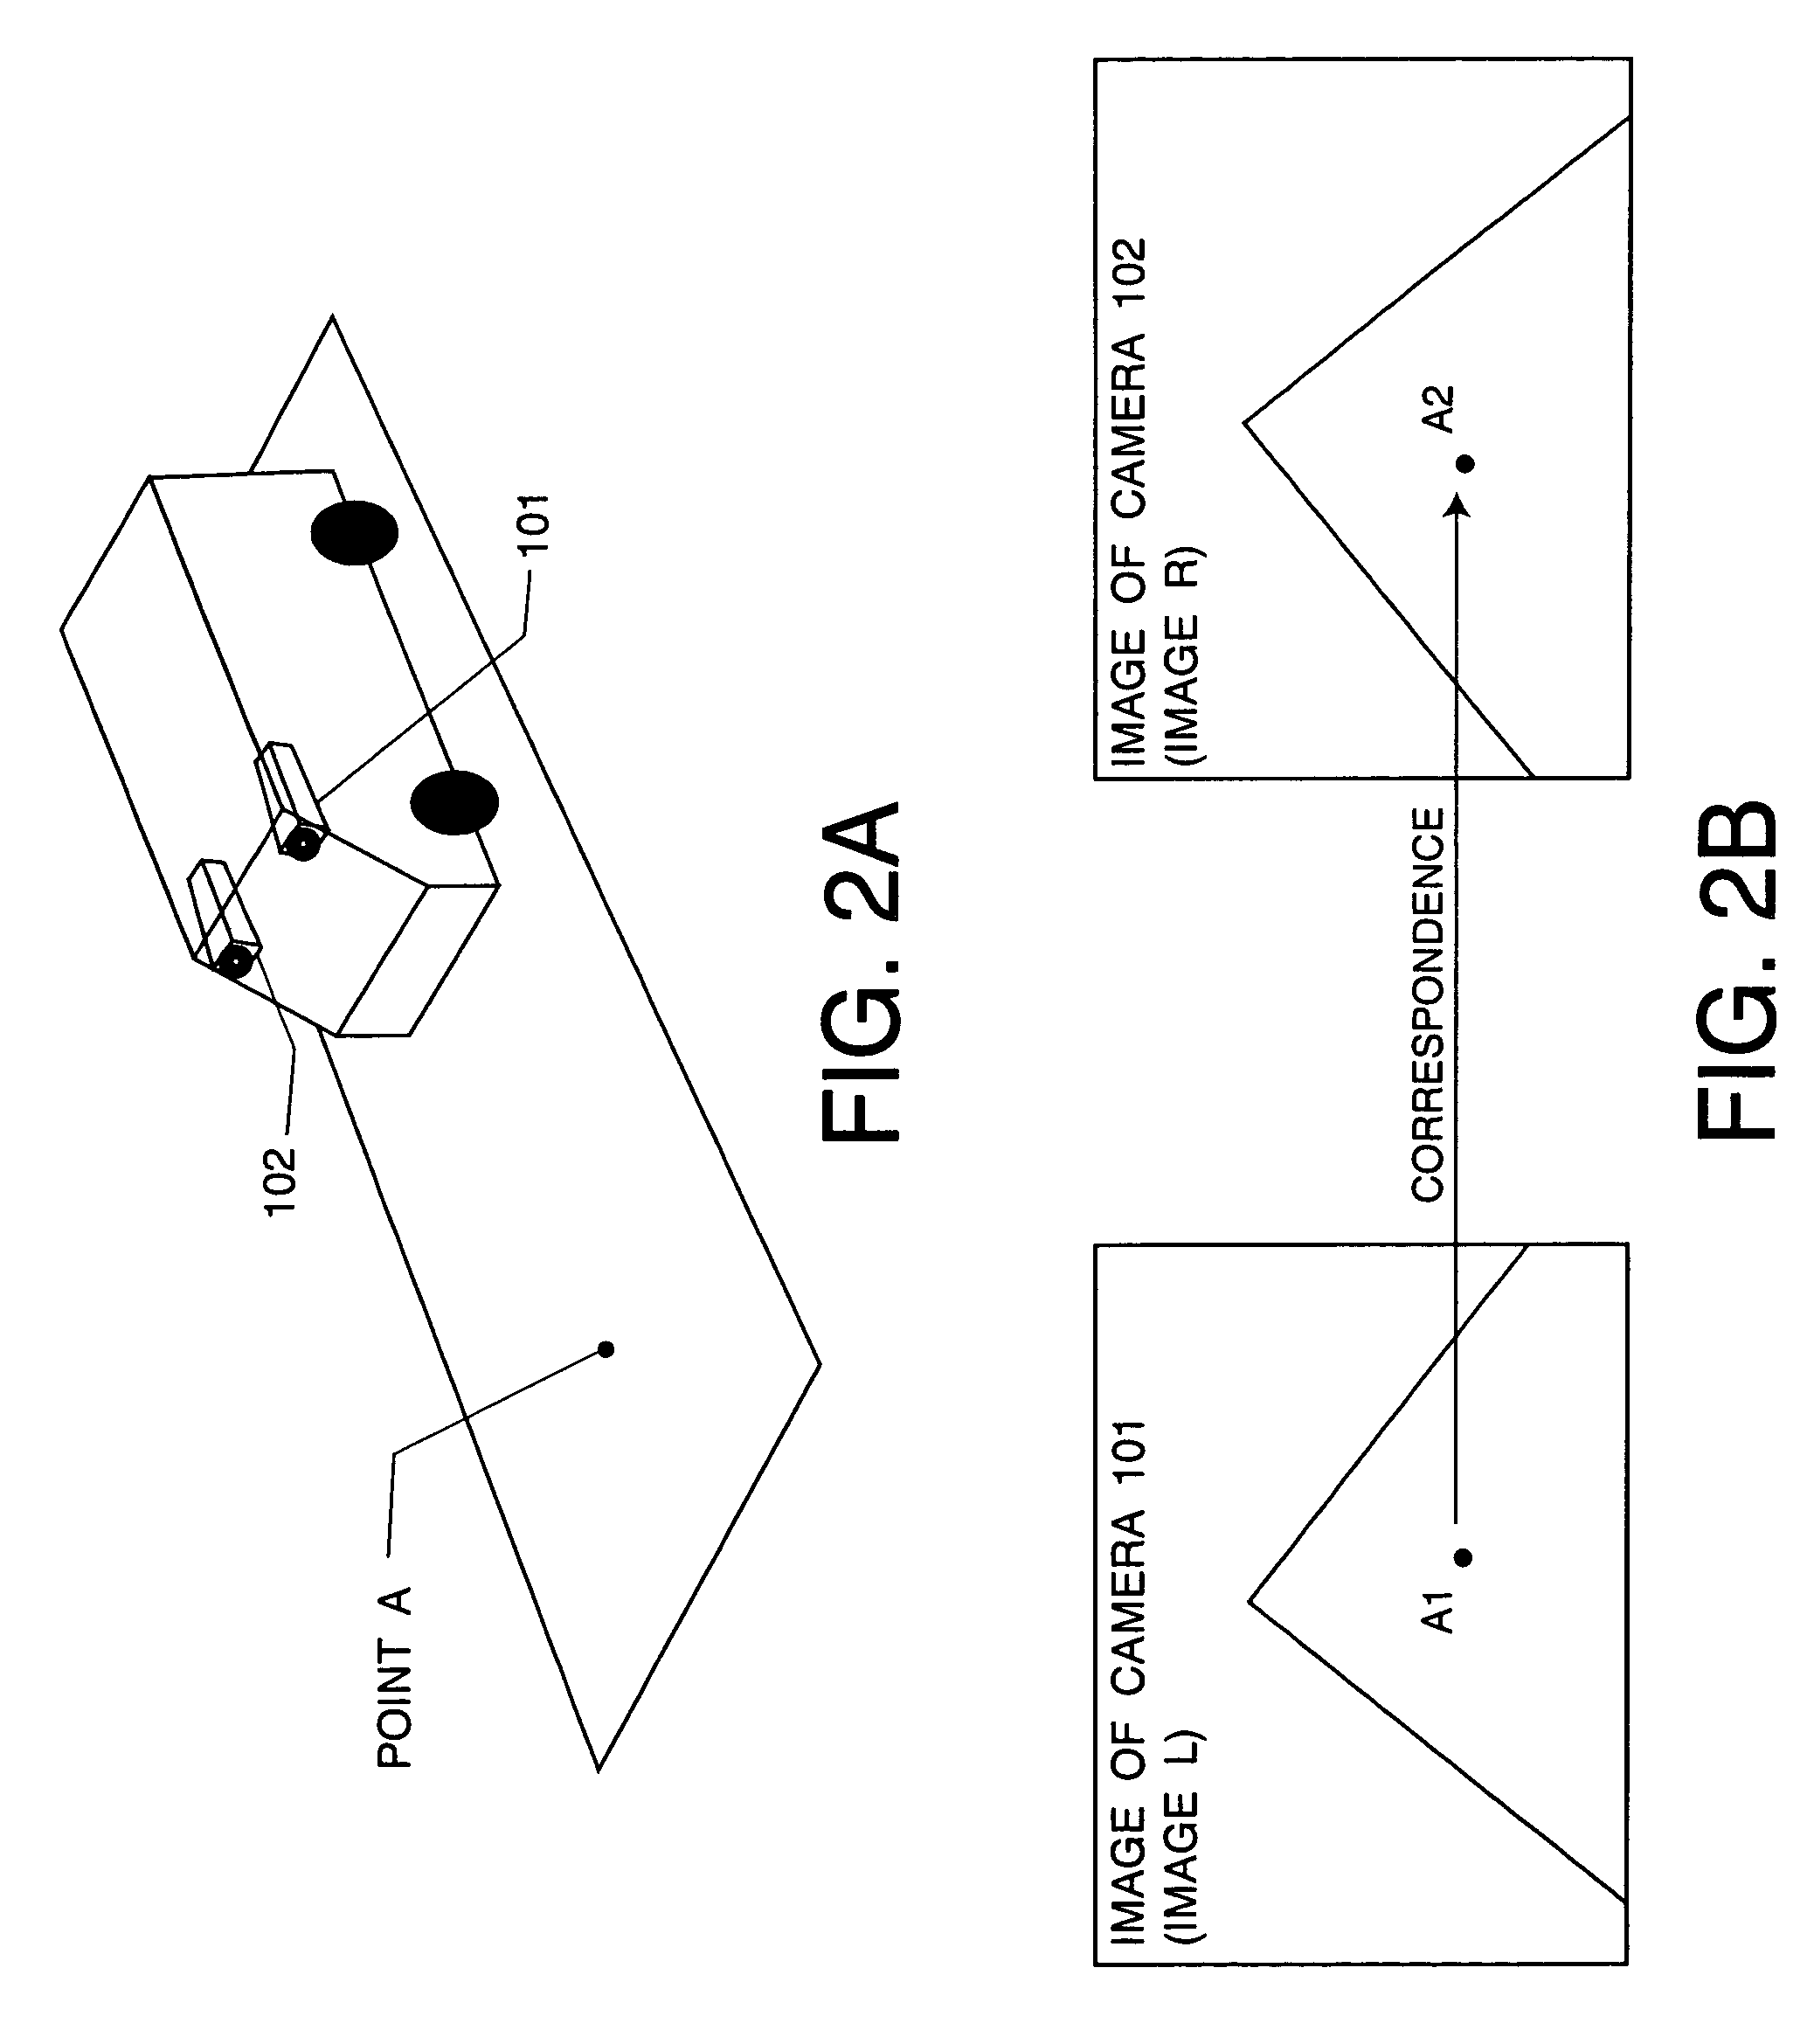 Obstacle detection apparatus and method